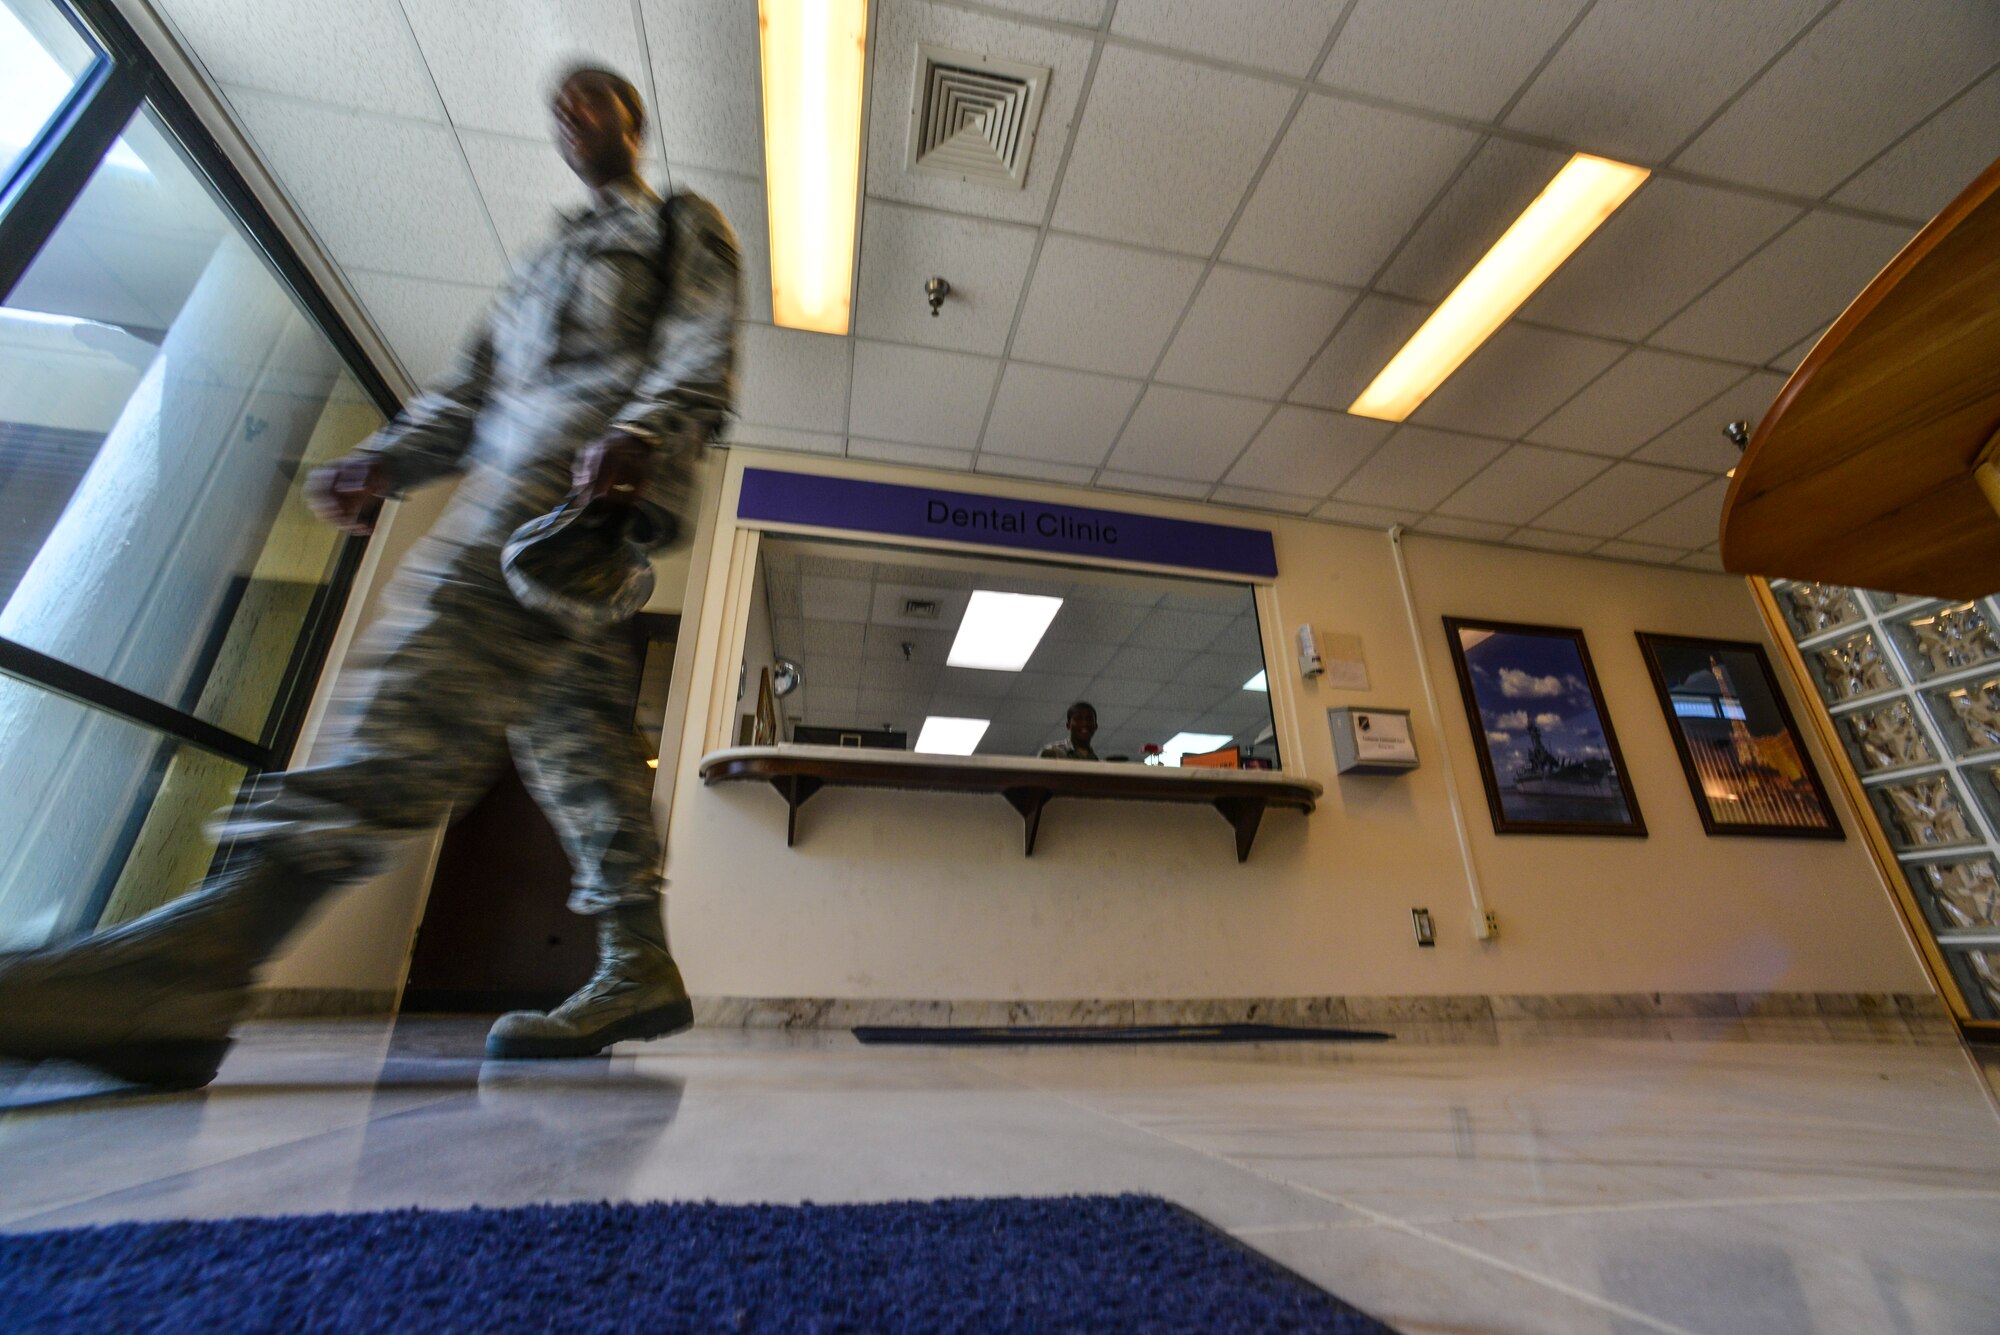 An Airman exits the 39th Medical Group after visiting the dental clinic July 22, 2014, Incirlik Air Base, Turkey. The 39th MDG dental clinic supports active duty service members at Incirlik AB, Izmir Air Station and 717th Air Base Squadron in Ankara, Turkey.  (U.S. Air Force photo by Senior Airman Nicole Sikorski/Released)
